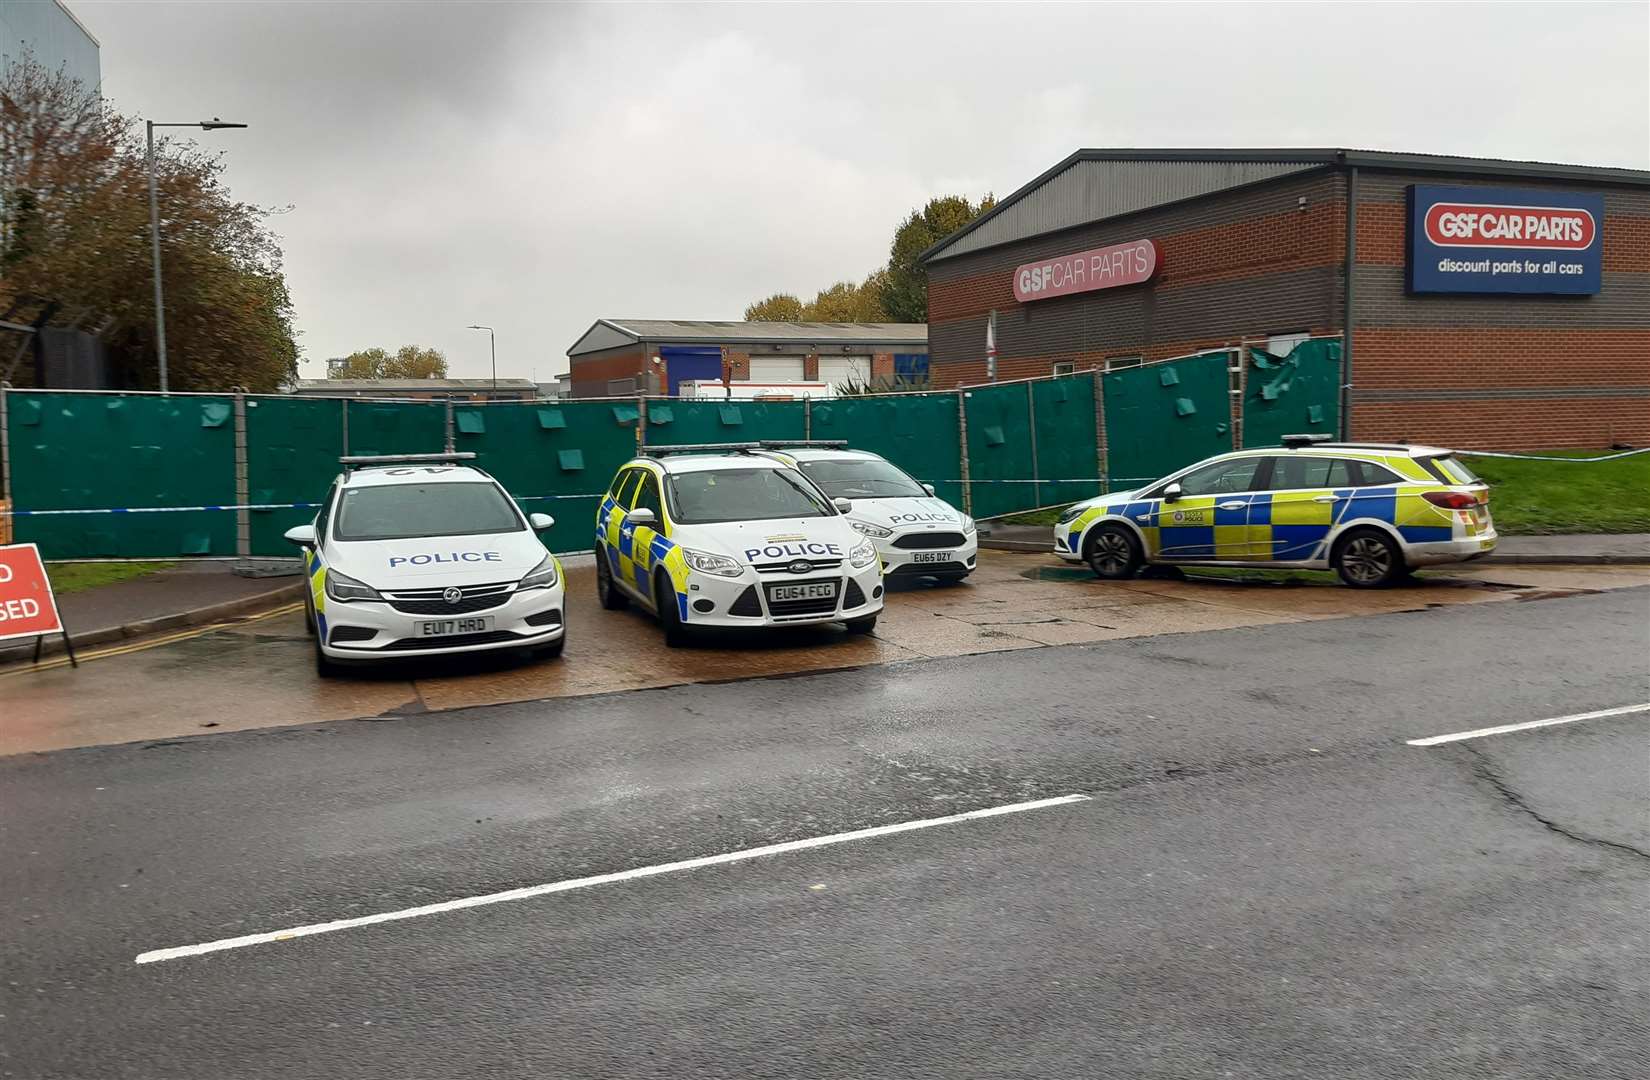 A police blockade remained at the Waterglade Industrial Estate in Eastern Avenue